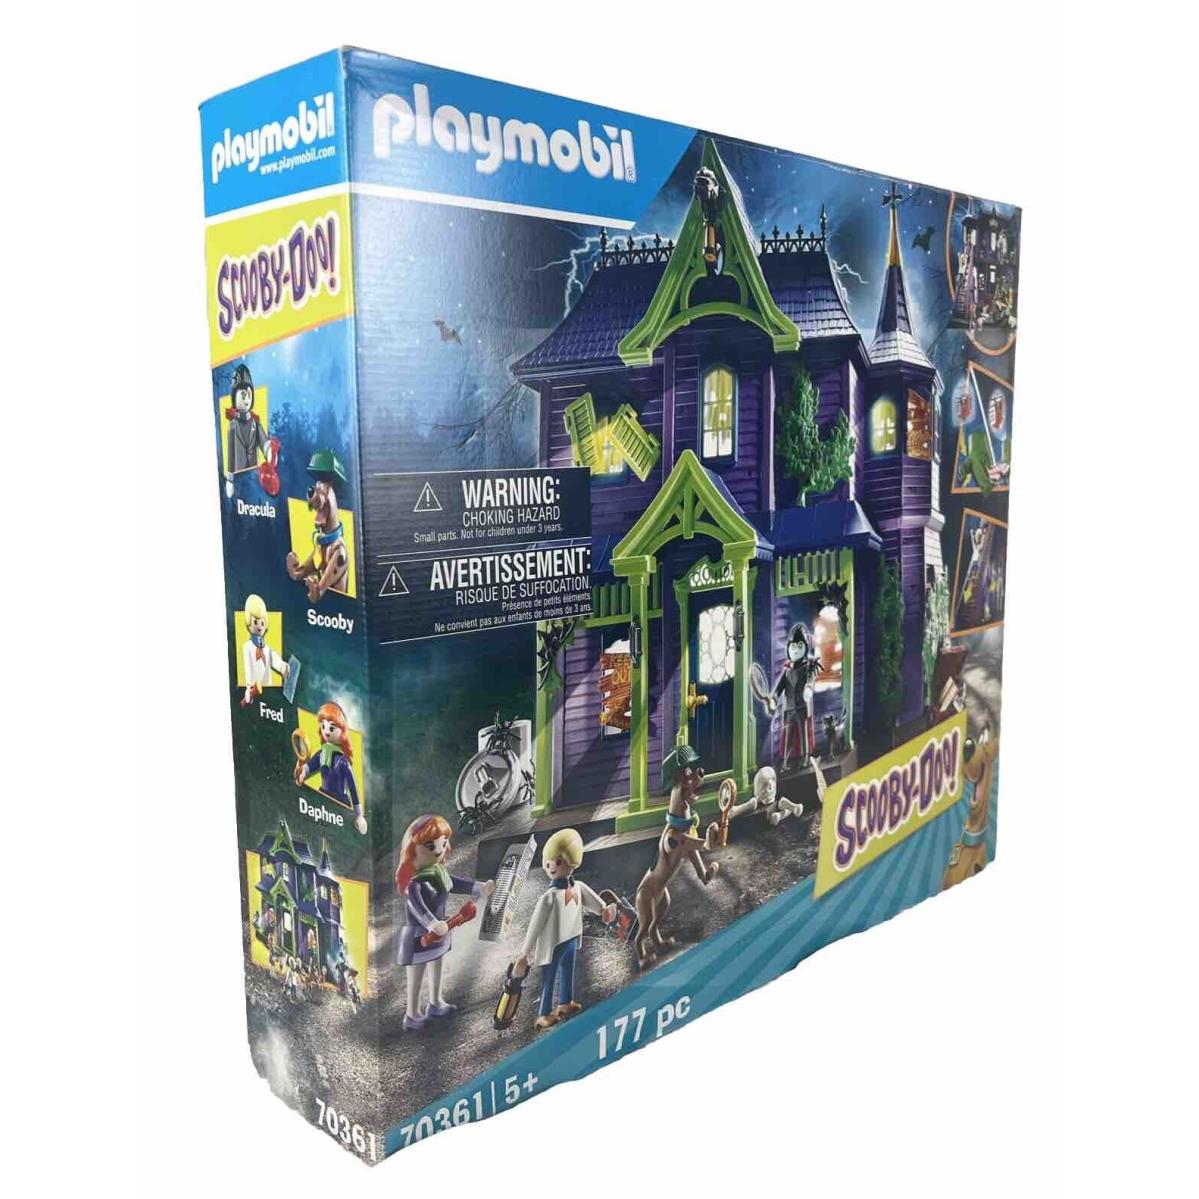 Playmobil Hanna Barbera Scooby Doo Adventure In The Mystery Mansion Playset